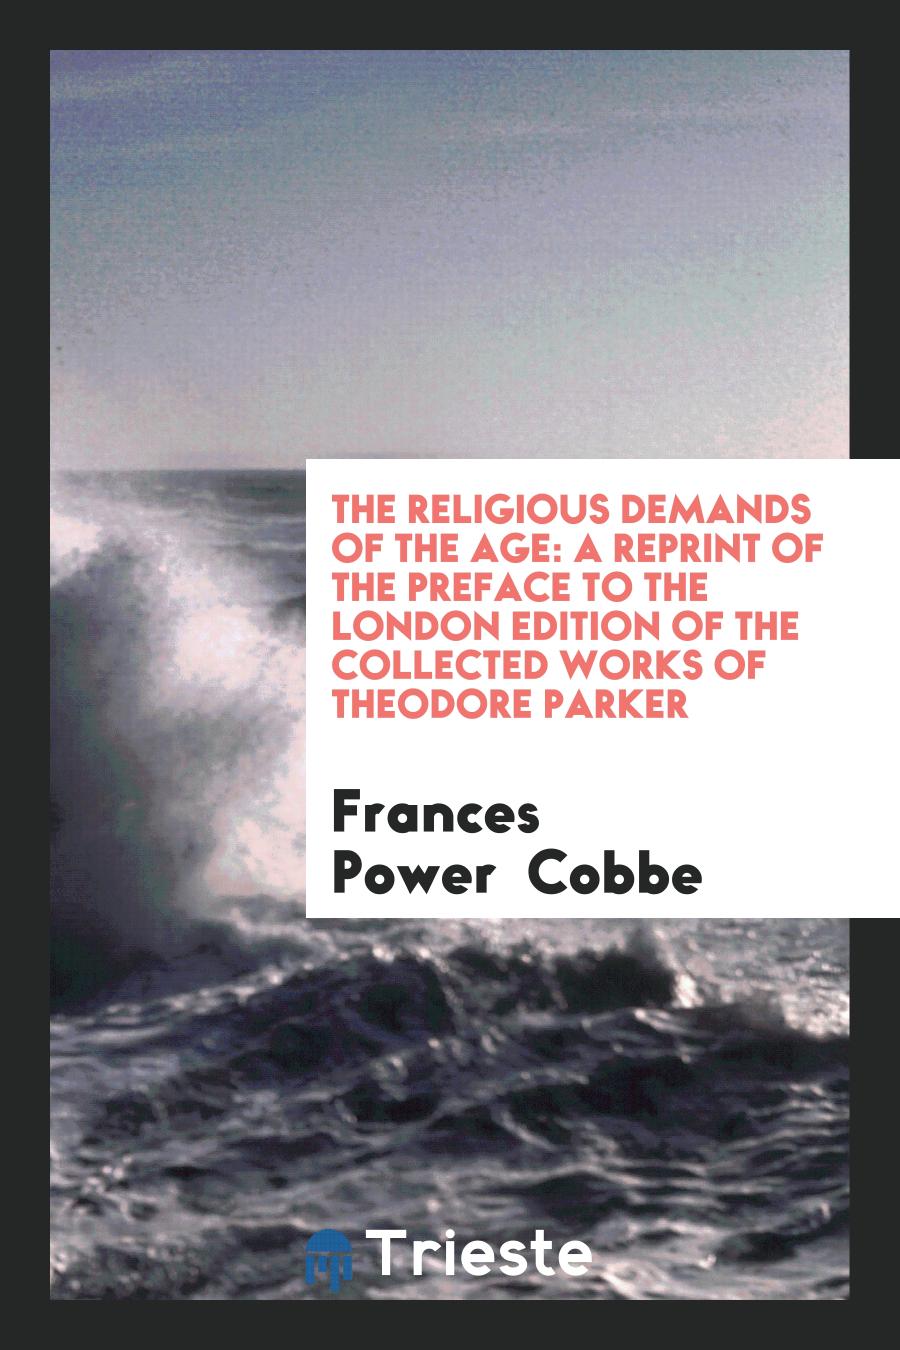 The Religious Demands of the Age: A Reprint of the Preface to the London Edition of the collected works of theodore parker